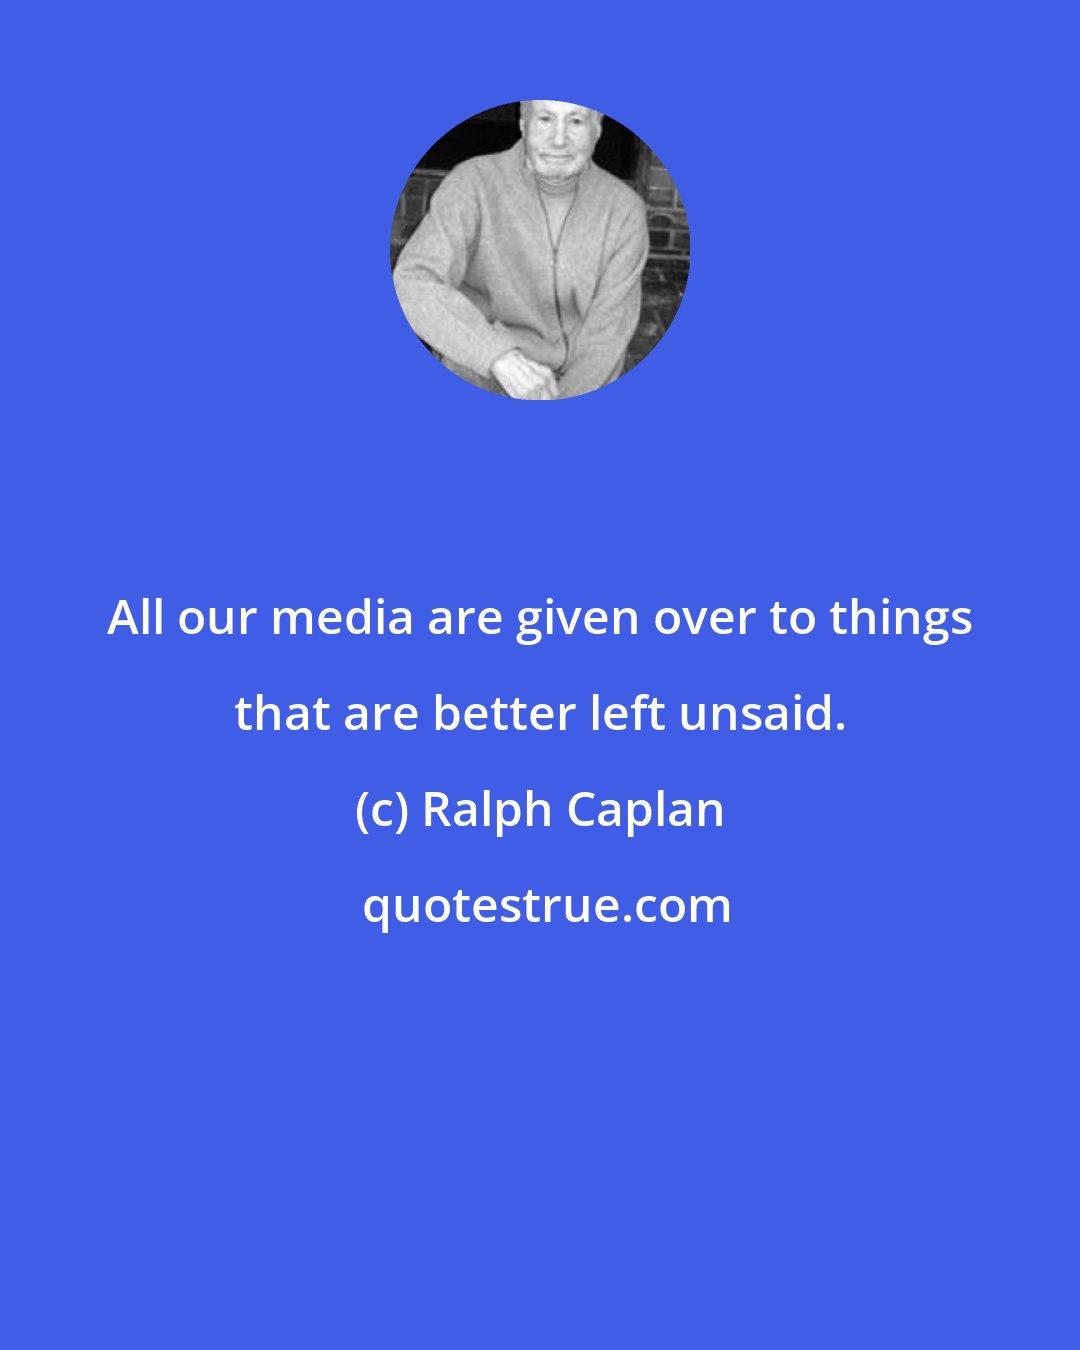 Ralph Caplan: All our media are given over to things that are better left unsaid.